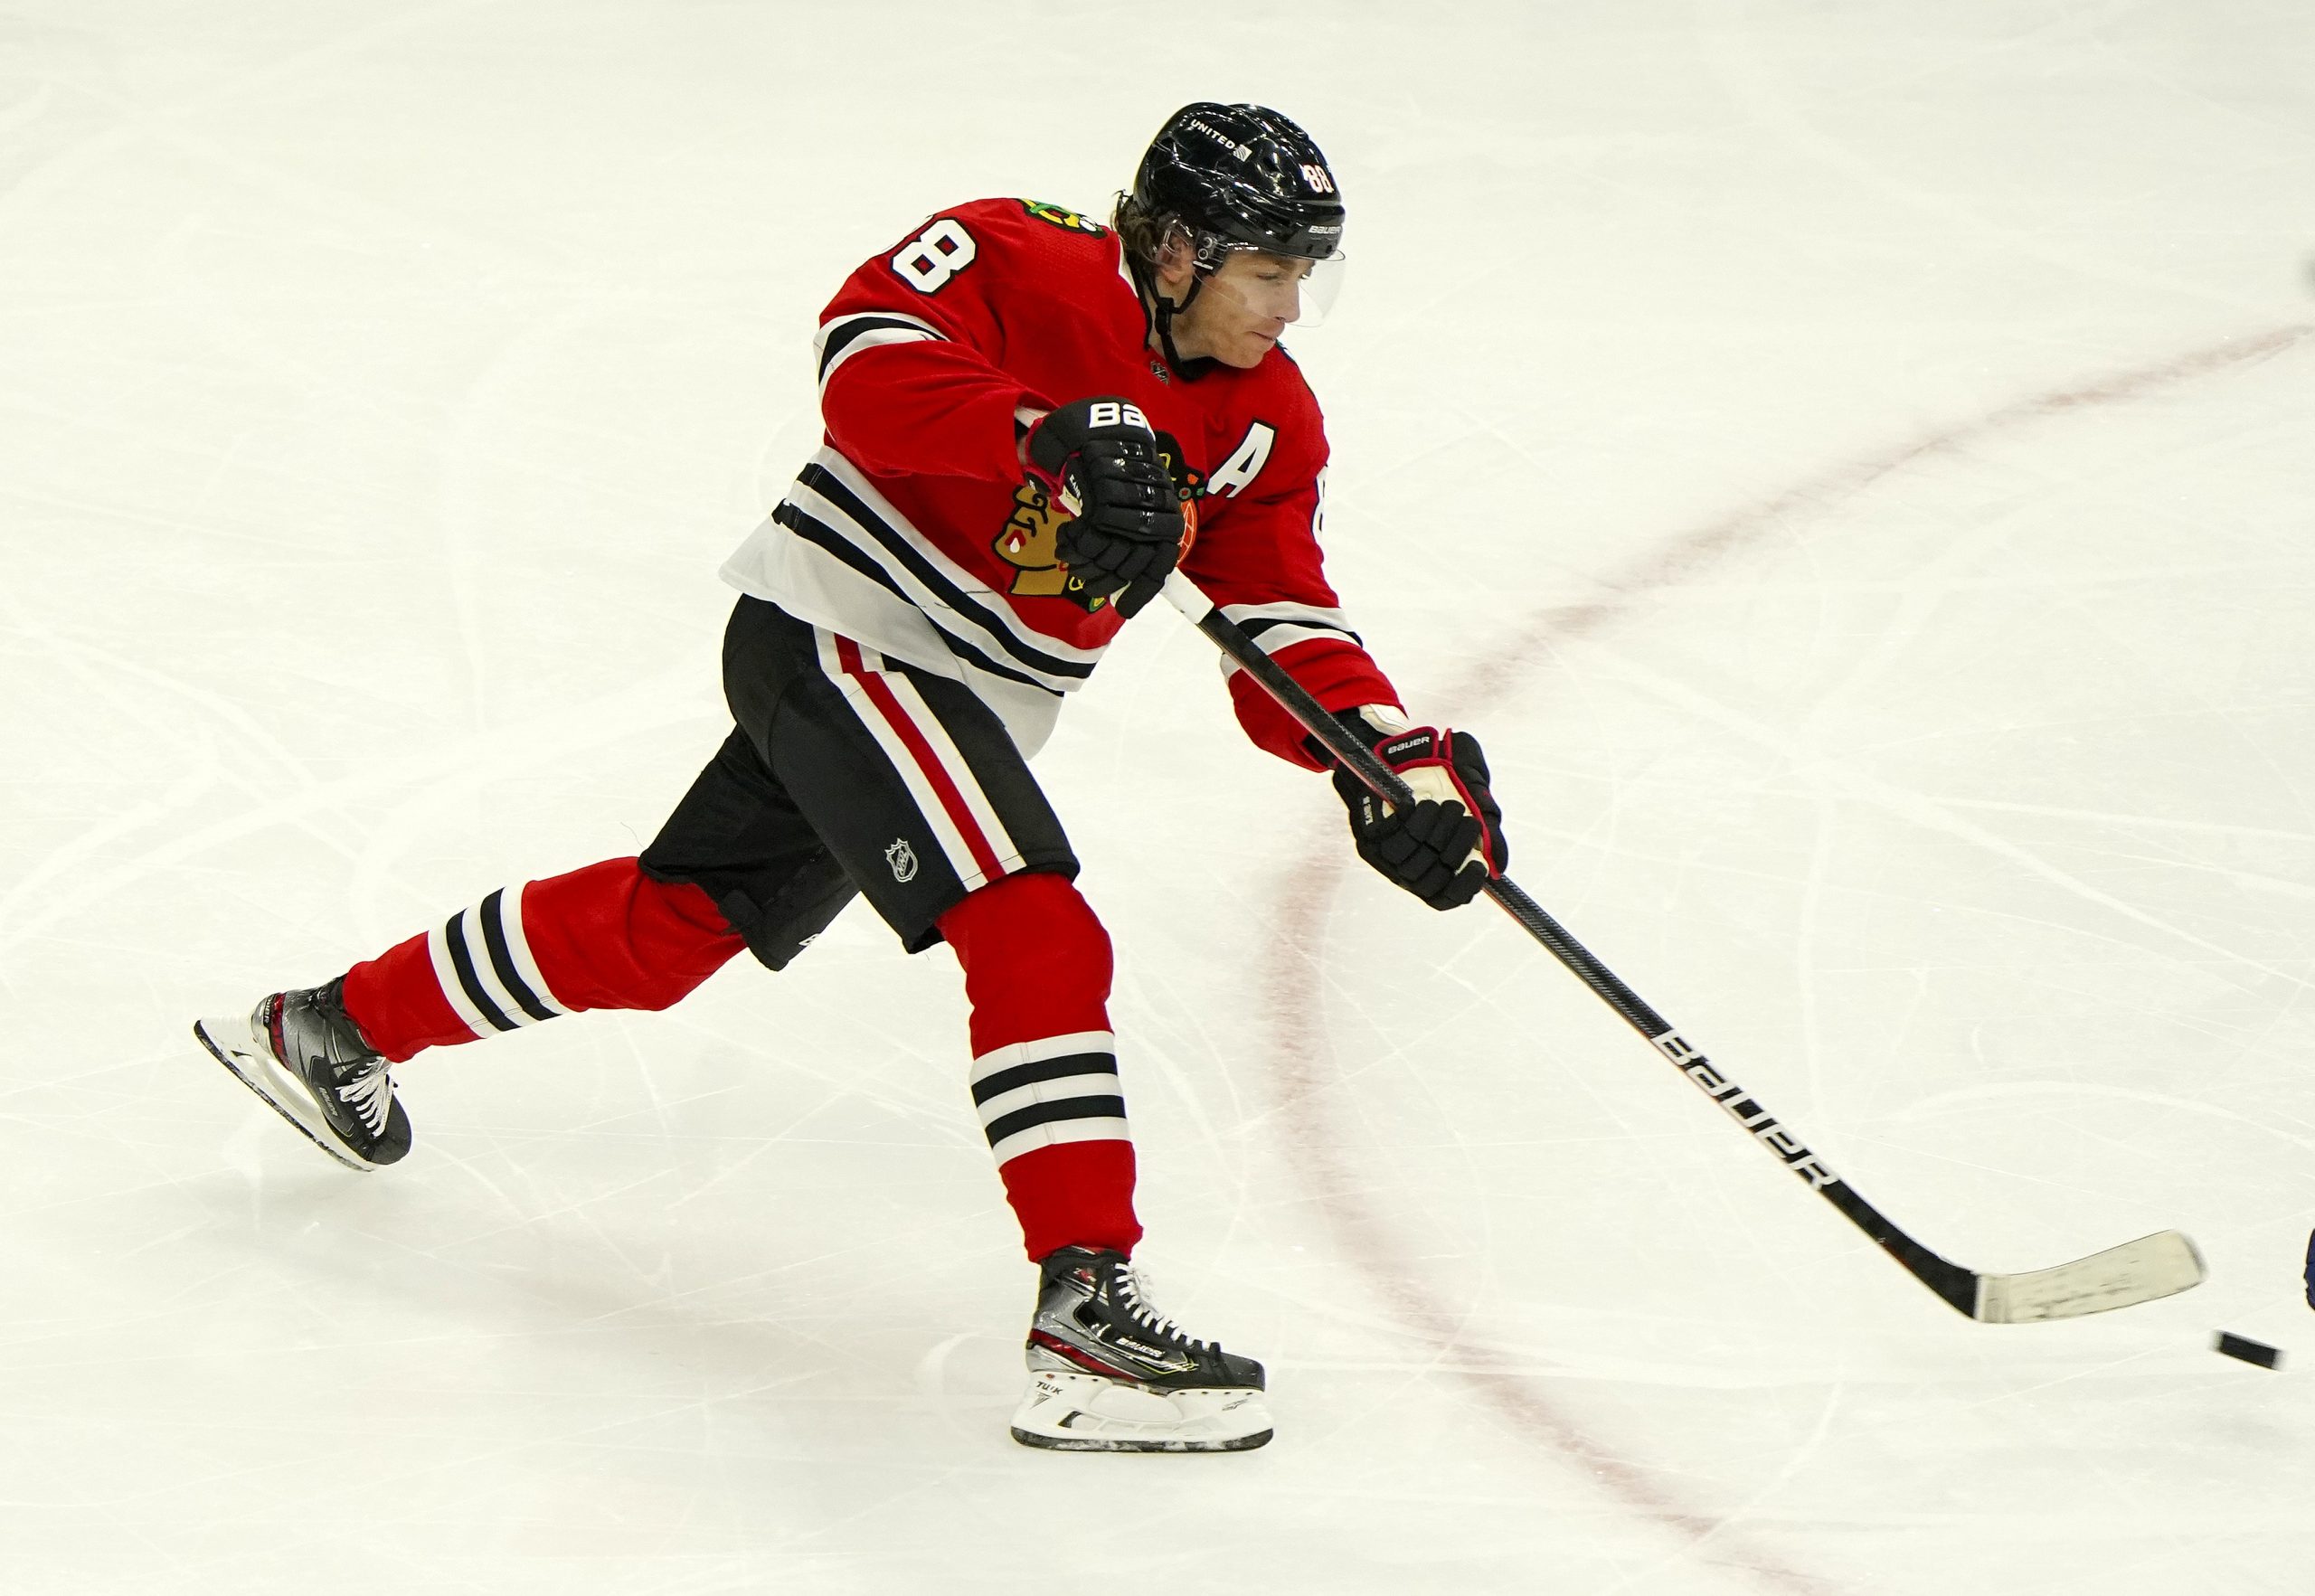 Chicago Blackhawks right wing Patrick Kane shoots the puck